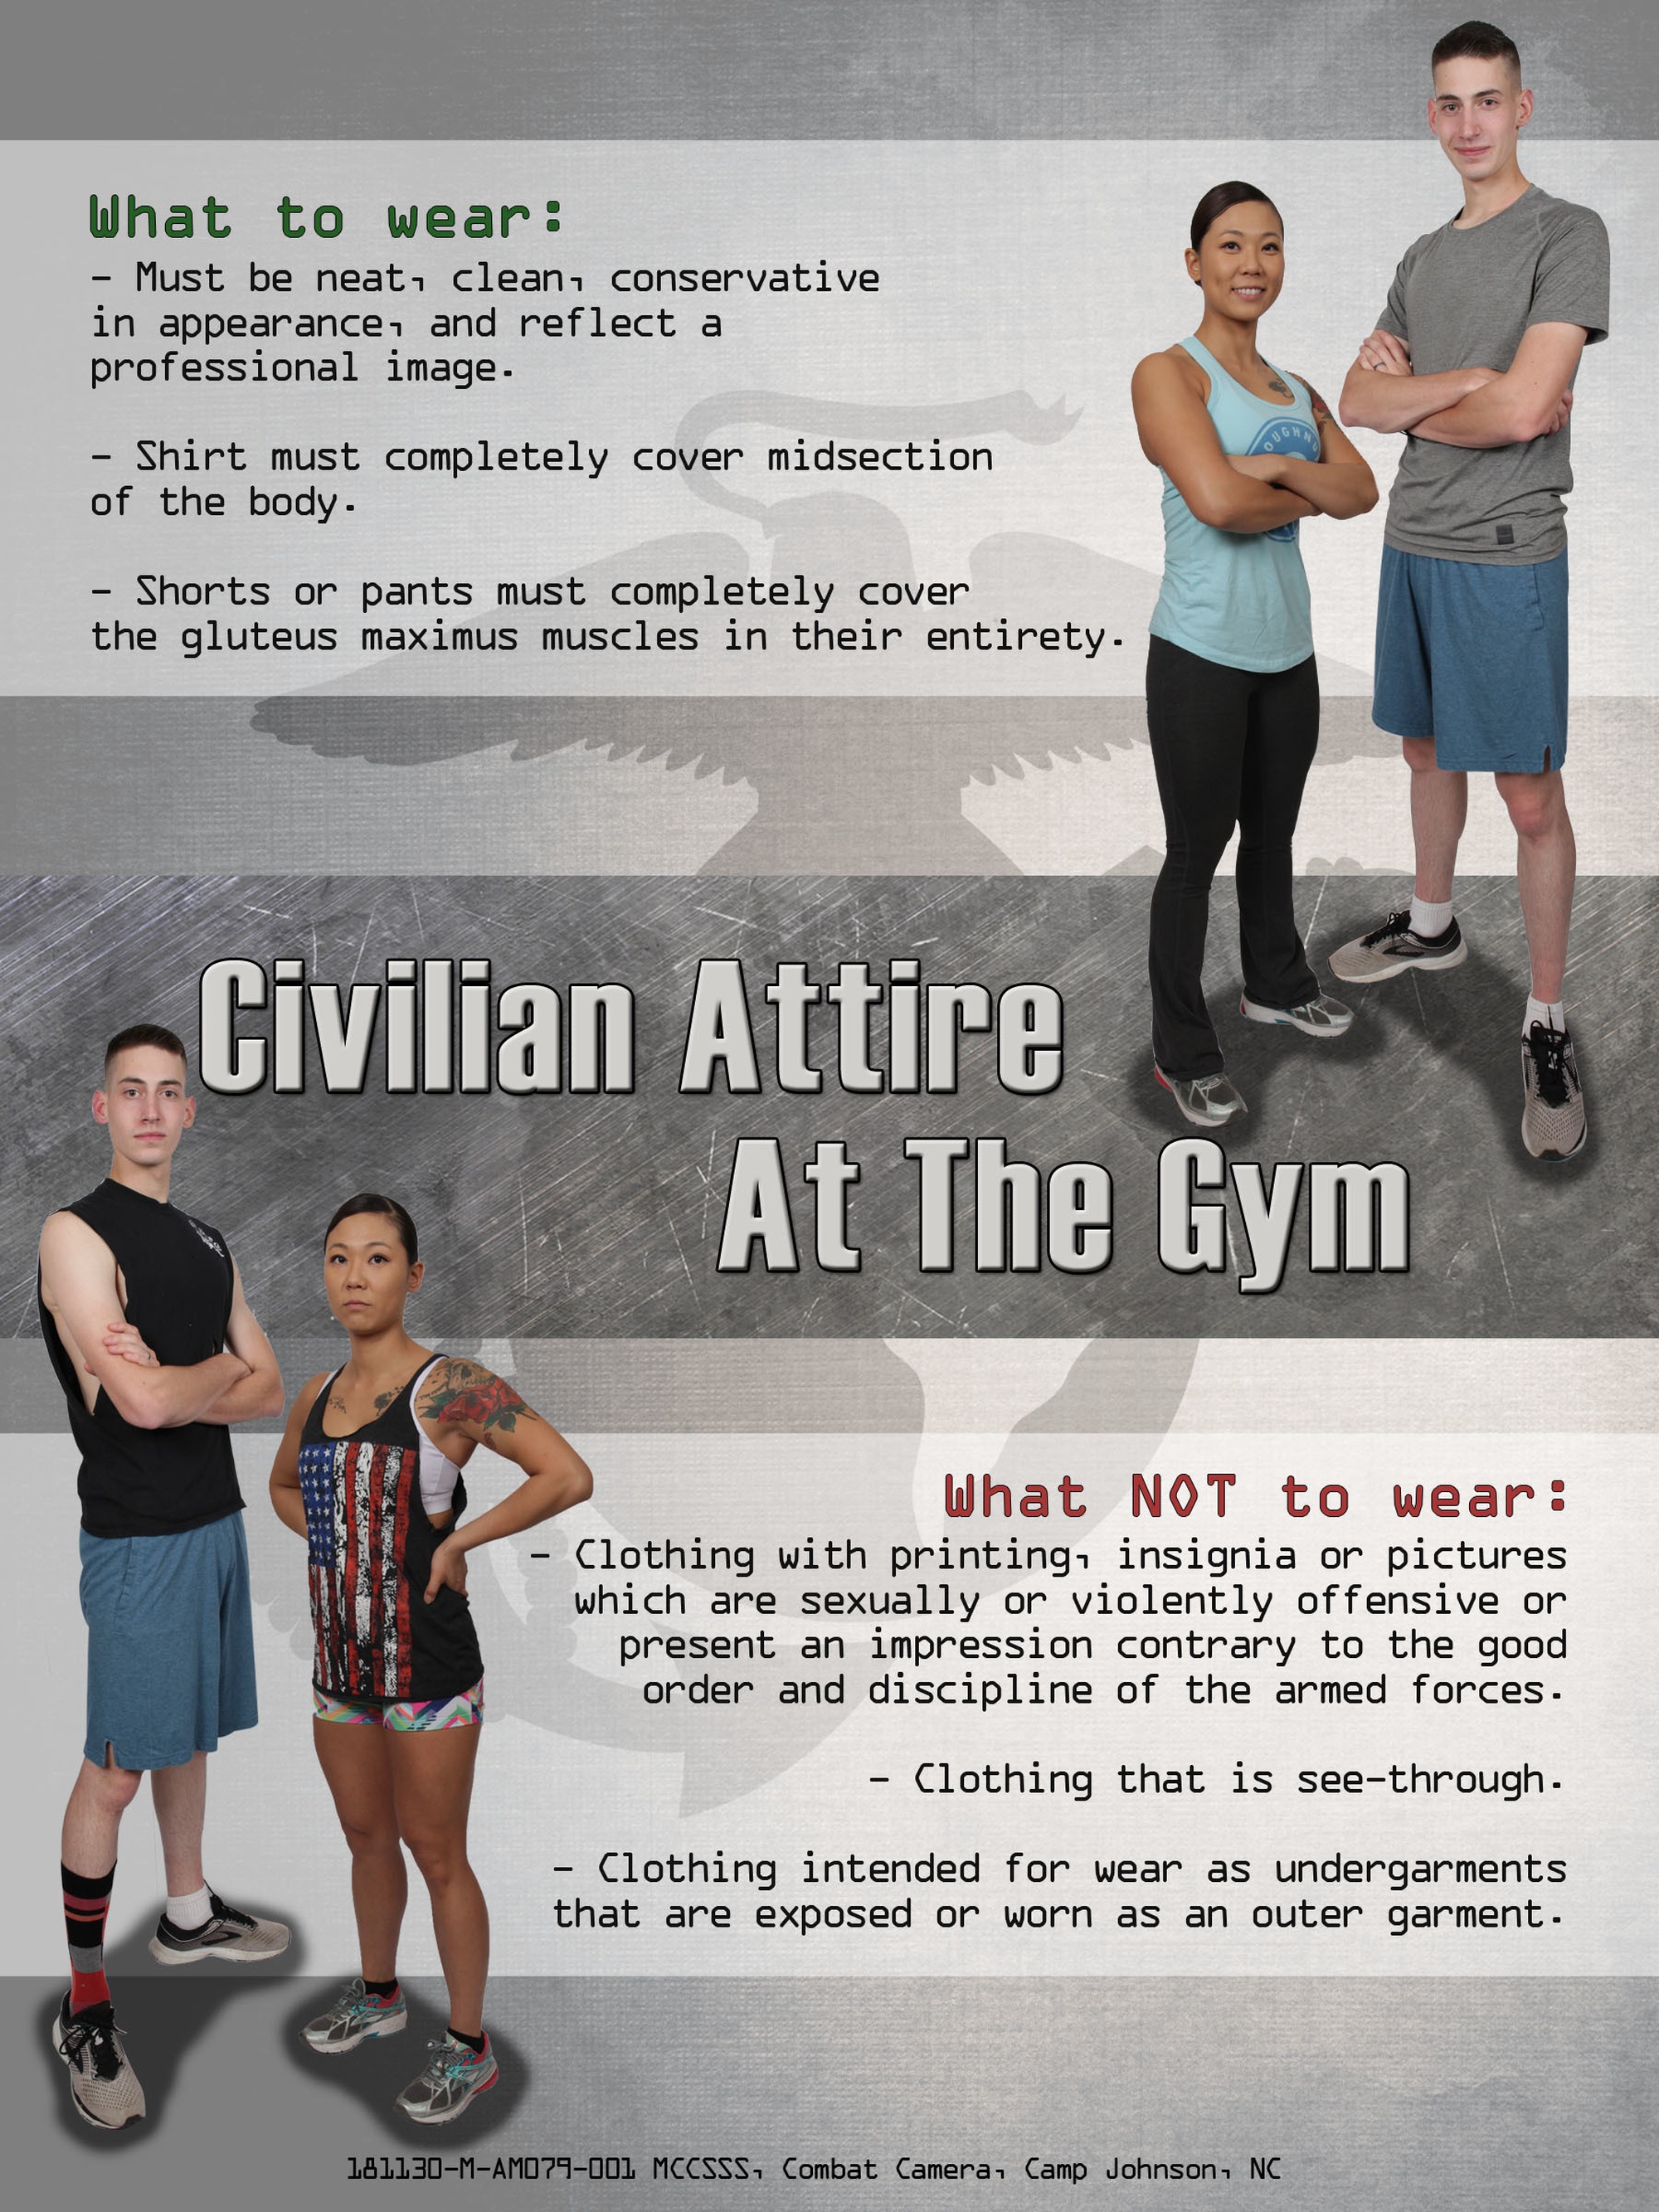 DVIDS - Images - Civilian Attire at the Gym [Image 1 of 2]